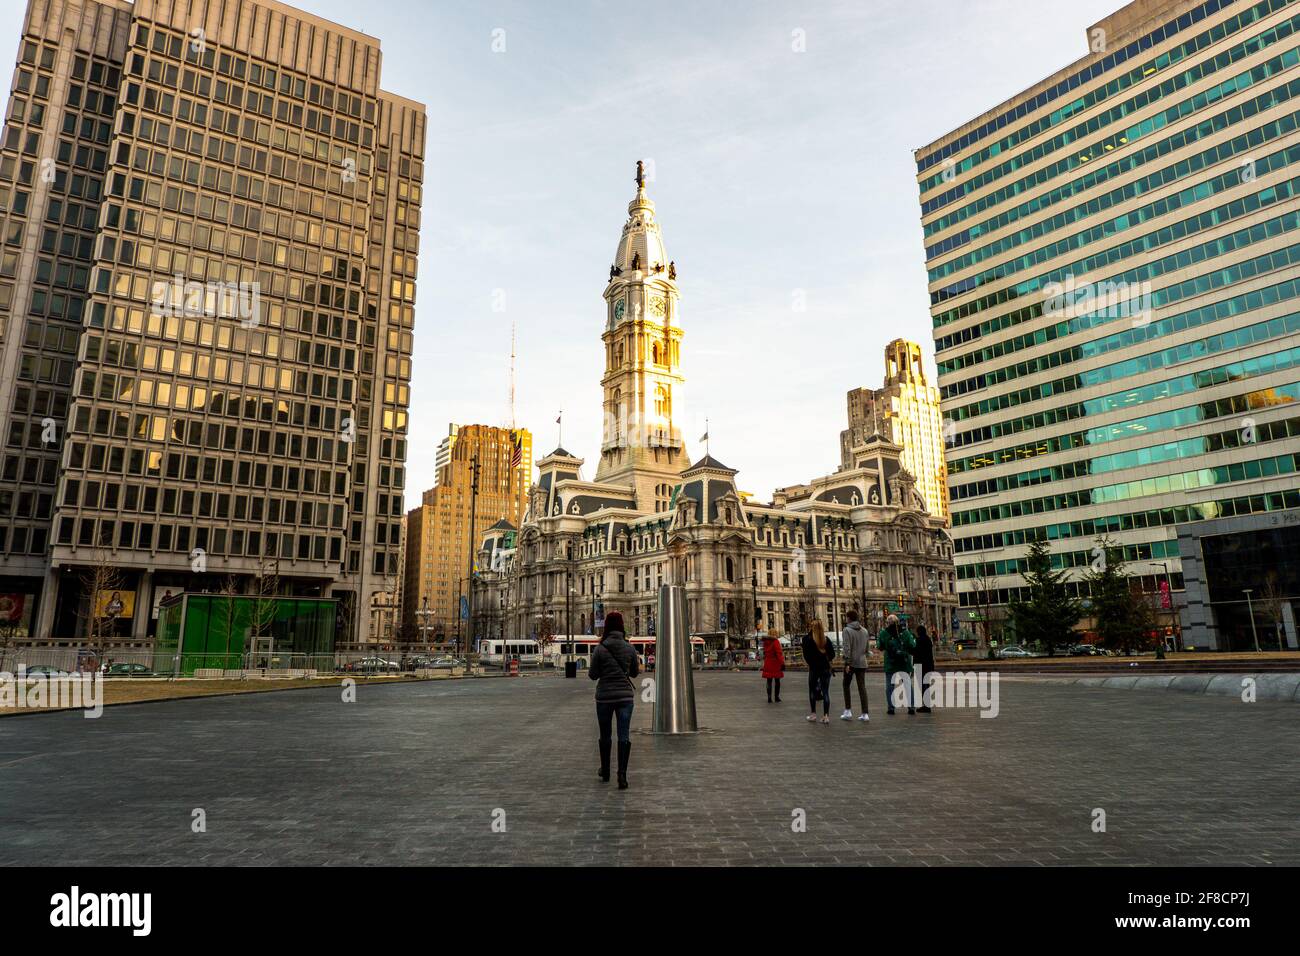 The beautiful Philadelphia City Hall in the city of Philadelphia in the state of Pennsylvania. This is right in the city center. Stock Photo